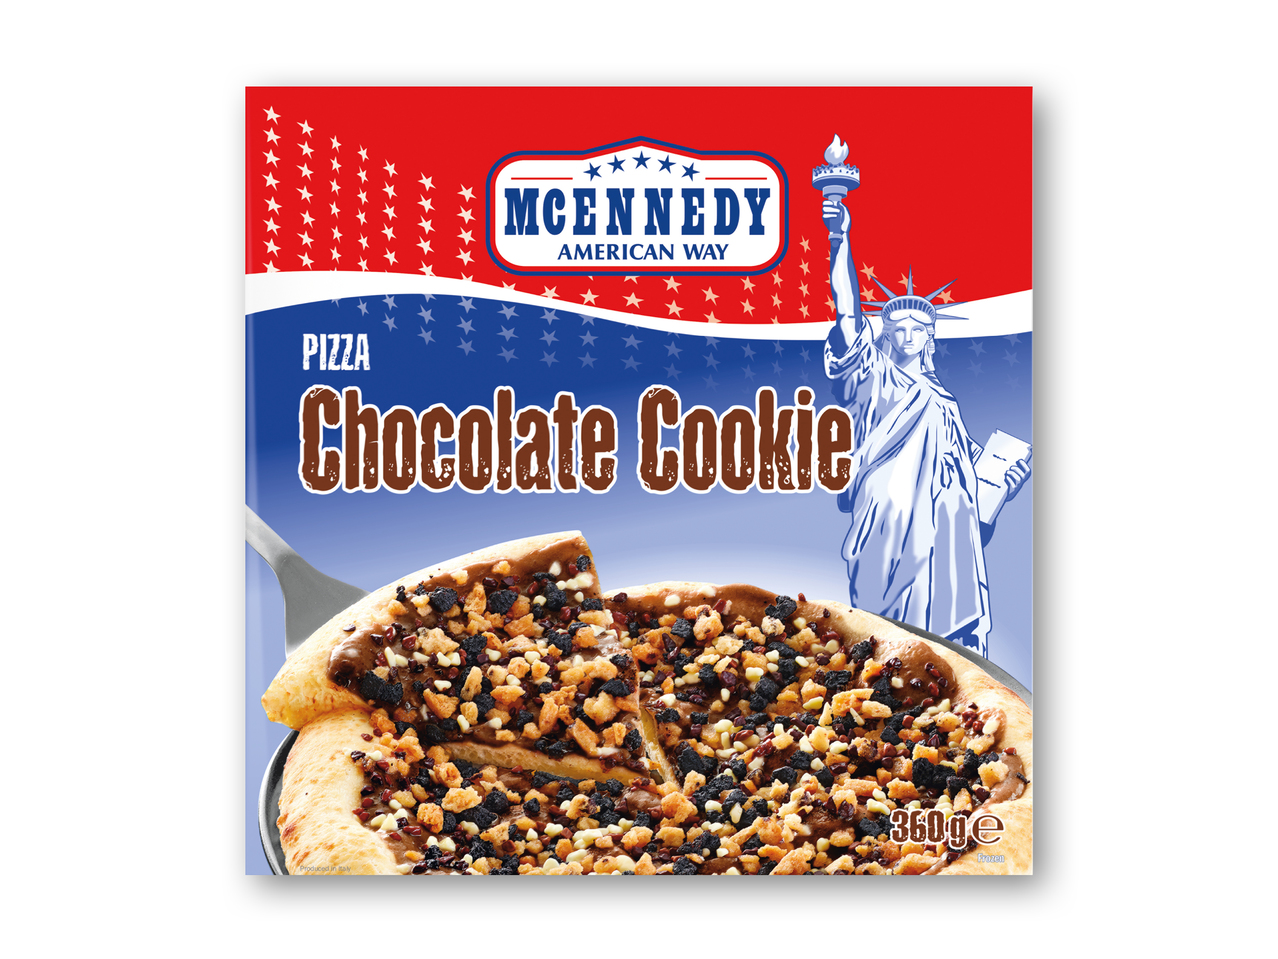 Pizza Chocolate Cookie